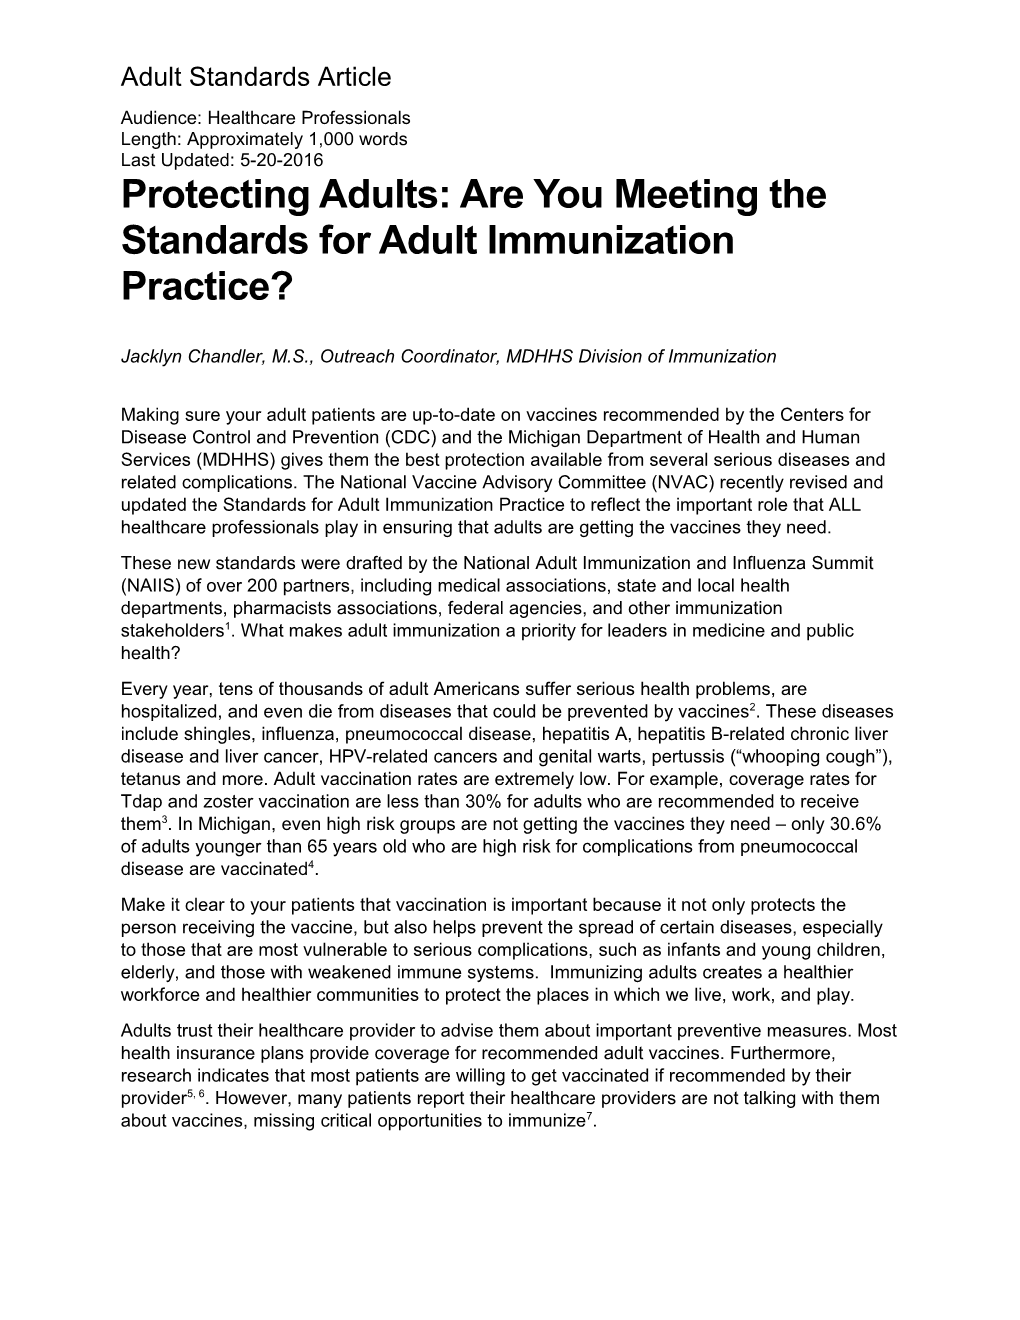 Protecting Adults: Are You Meeting the Standards for Adult Immunization Practice?